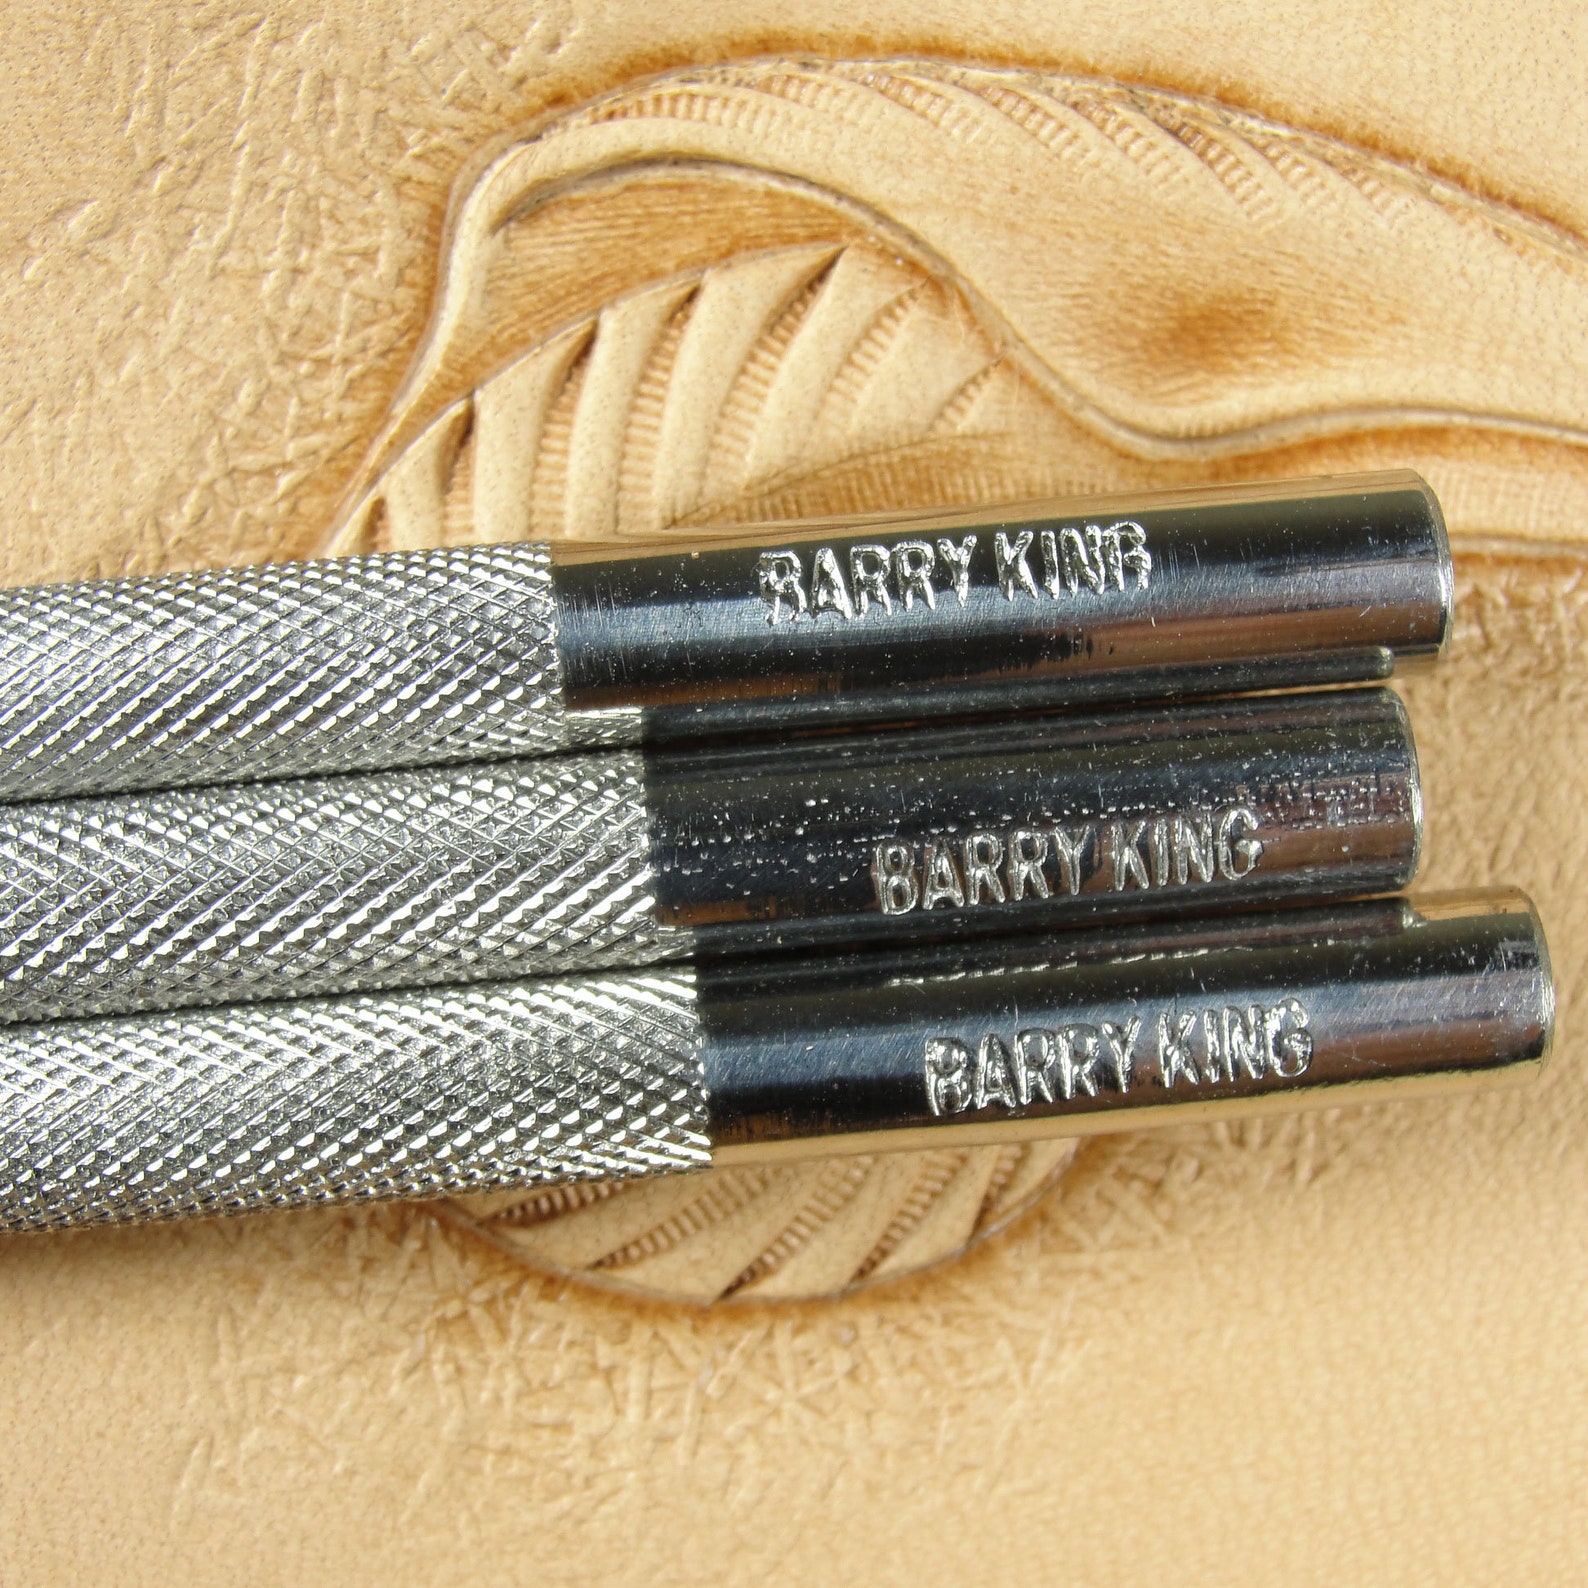 Stainless Steel Barry King 3-piece Smooth Low Angle Beveler - Etsy